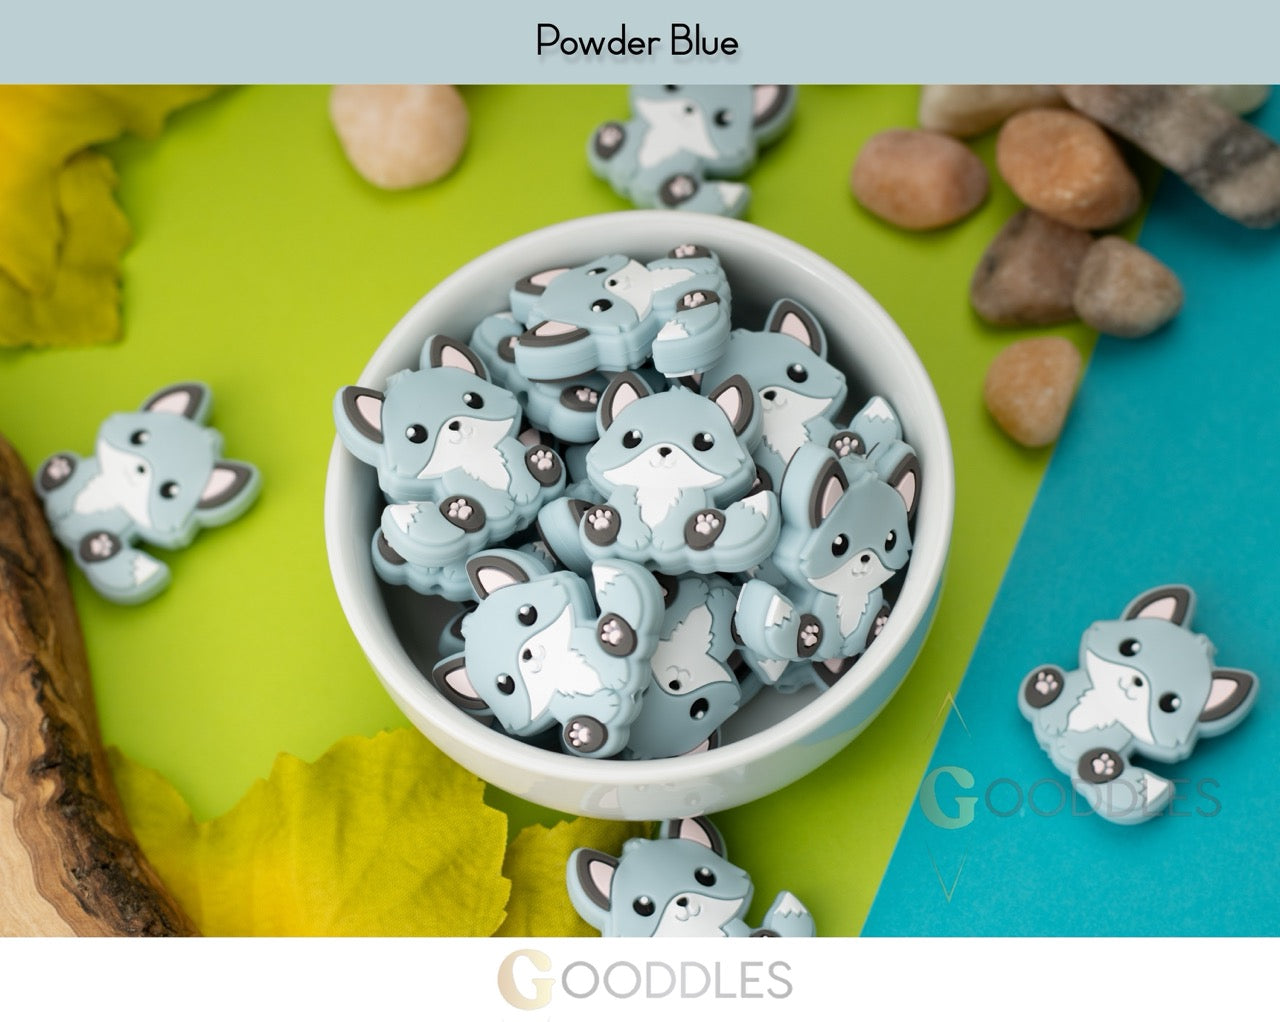 Fox Silicone Focal Beads